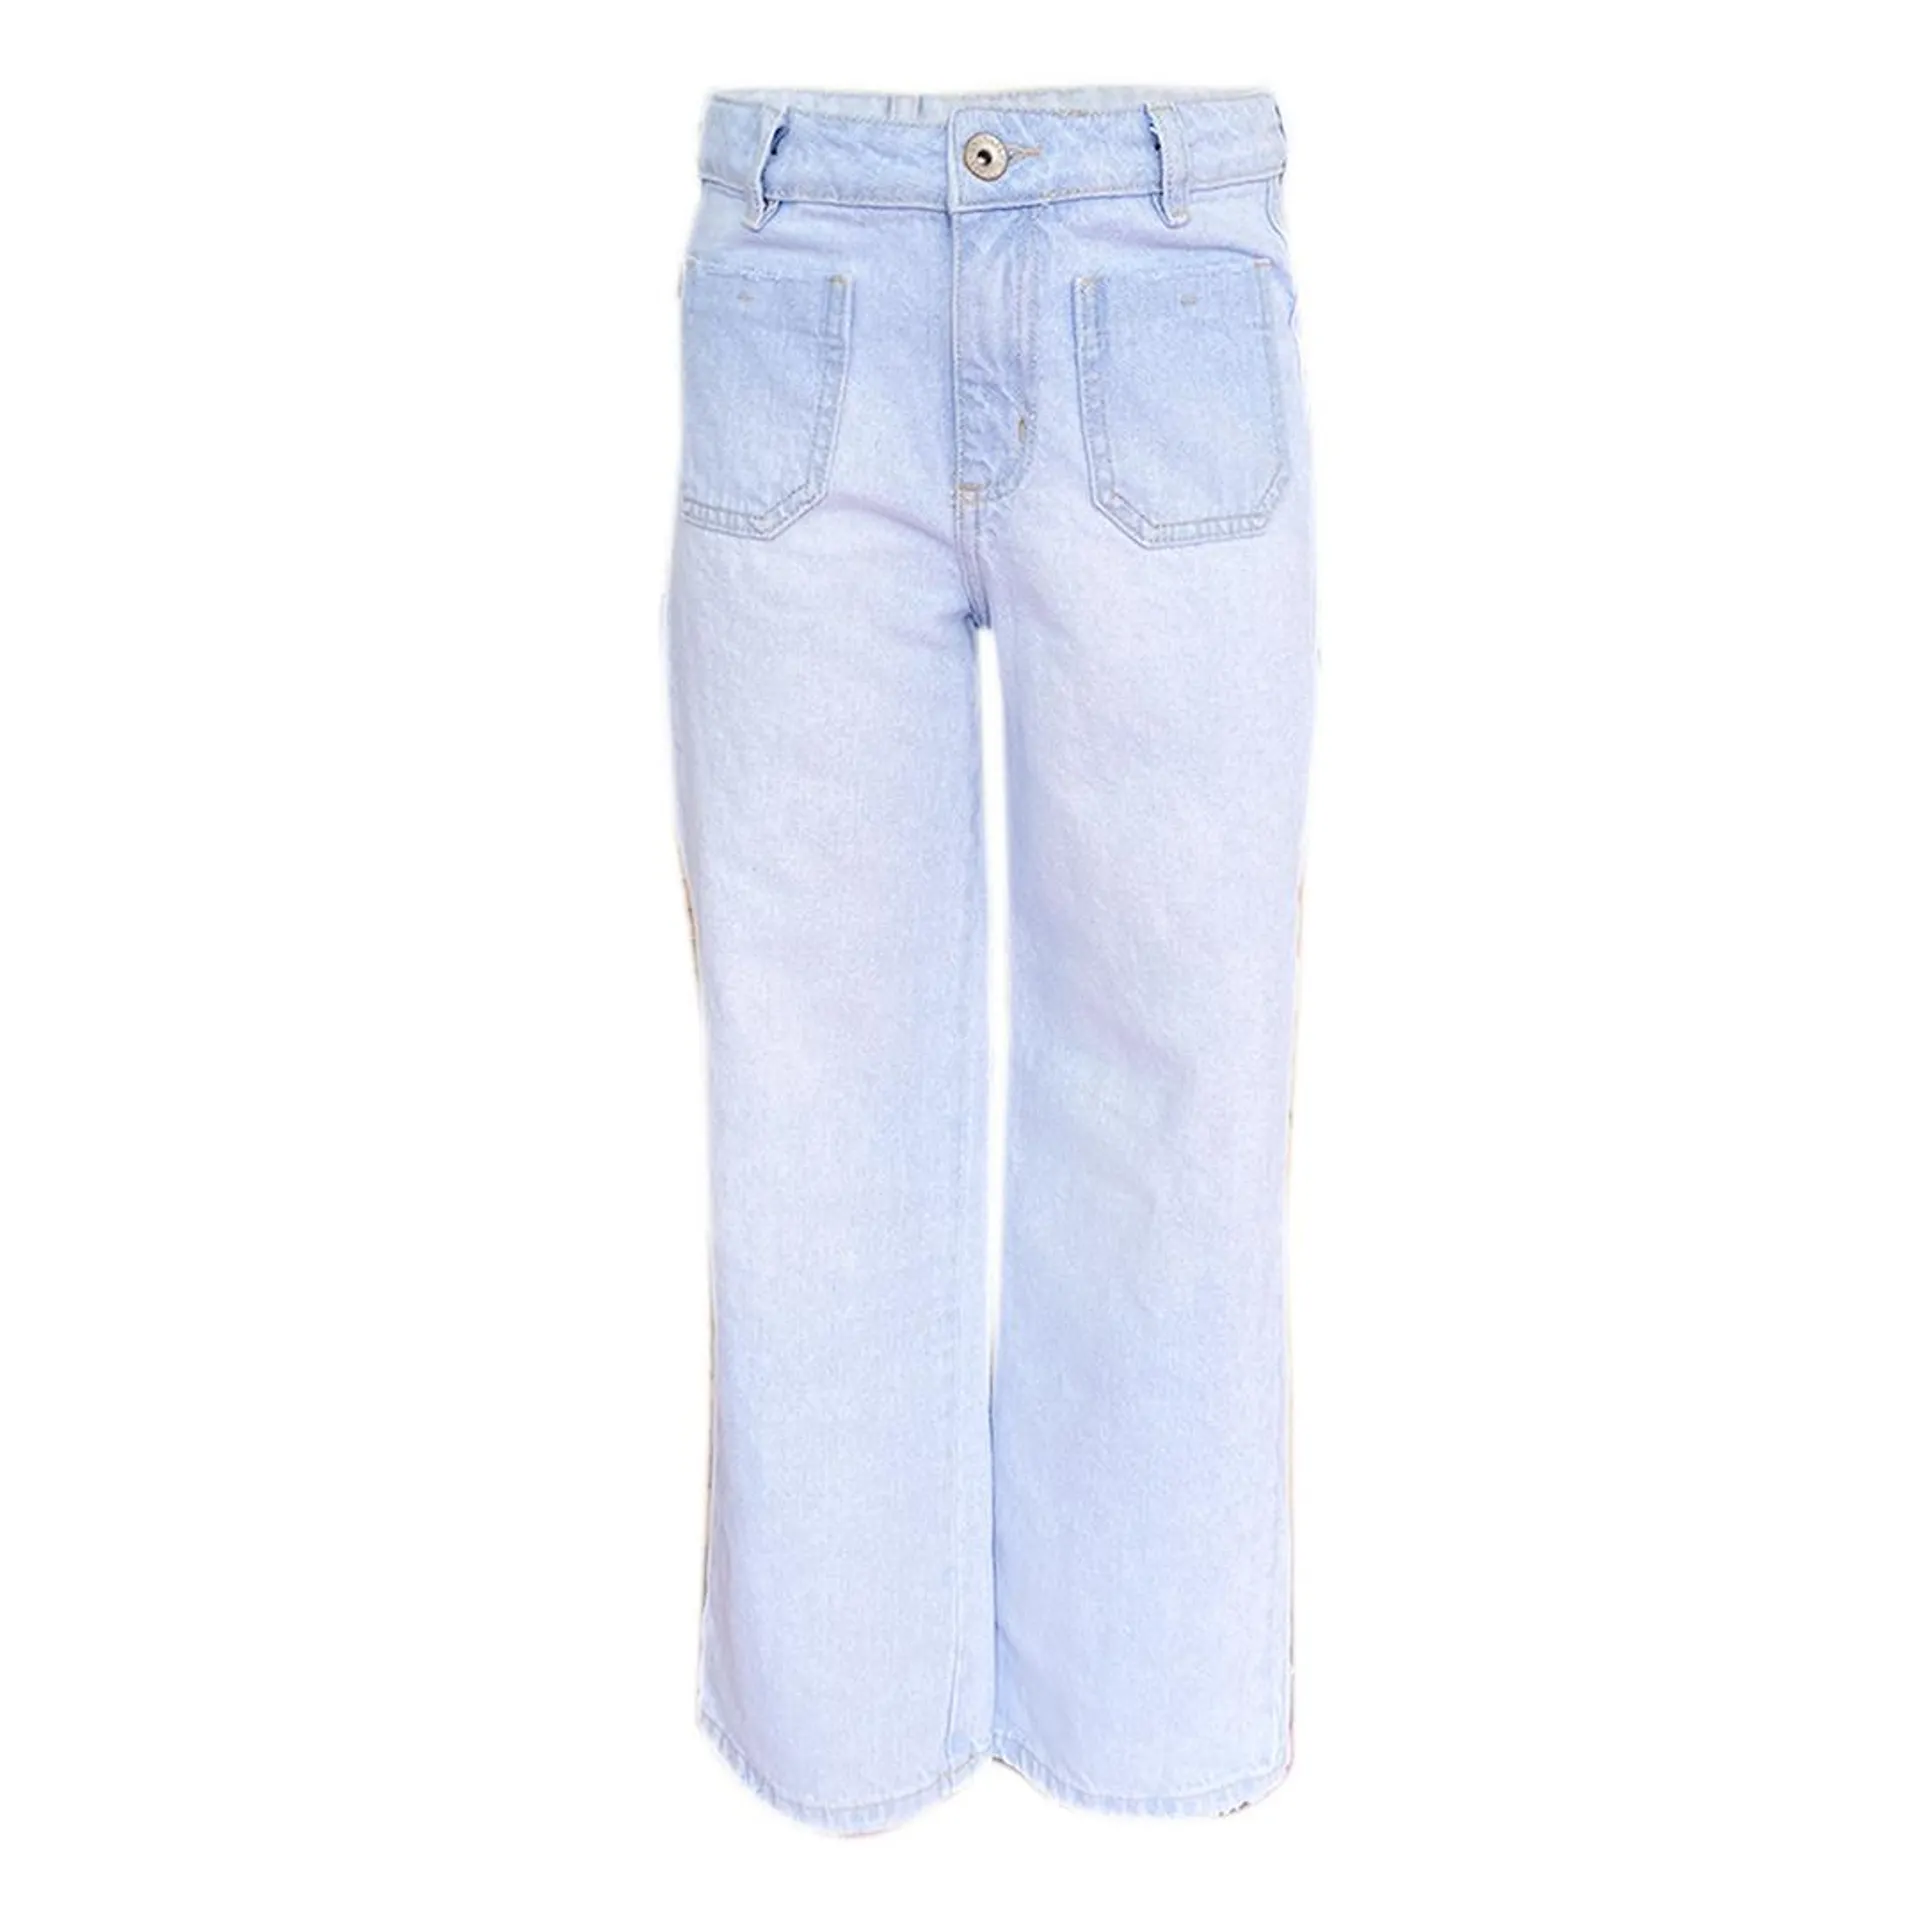 MARINE JEANS FOR GIRLS